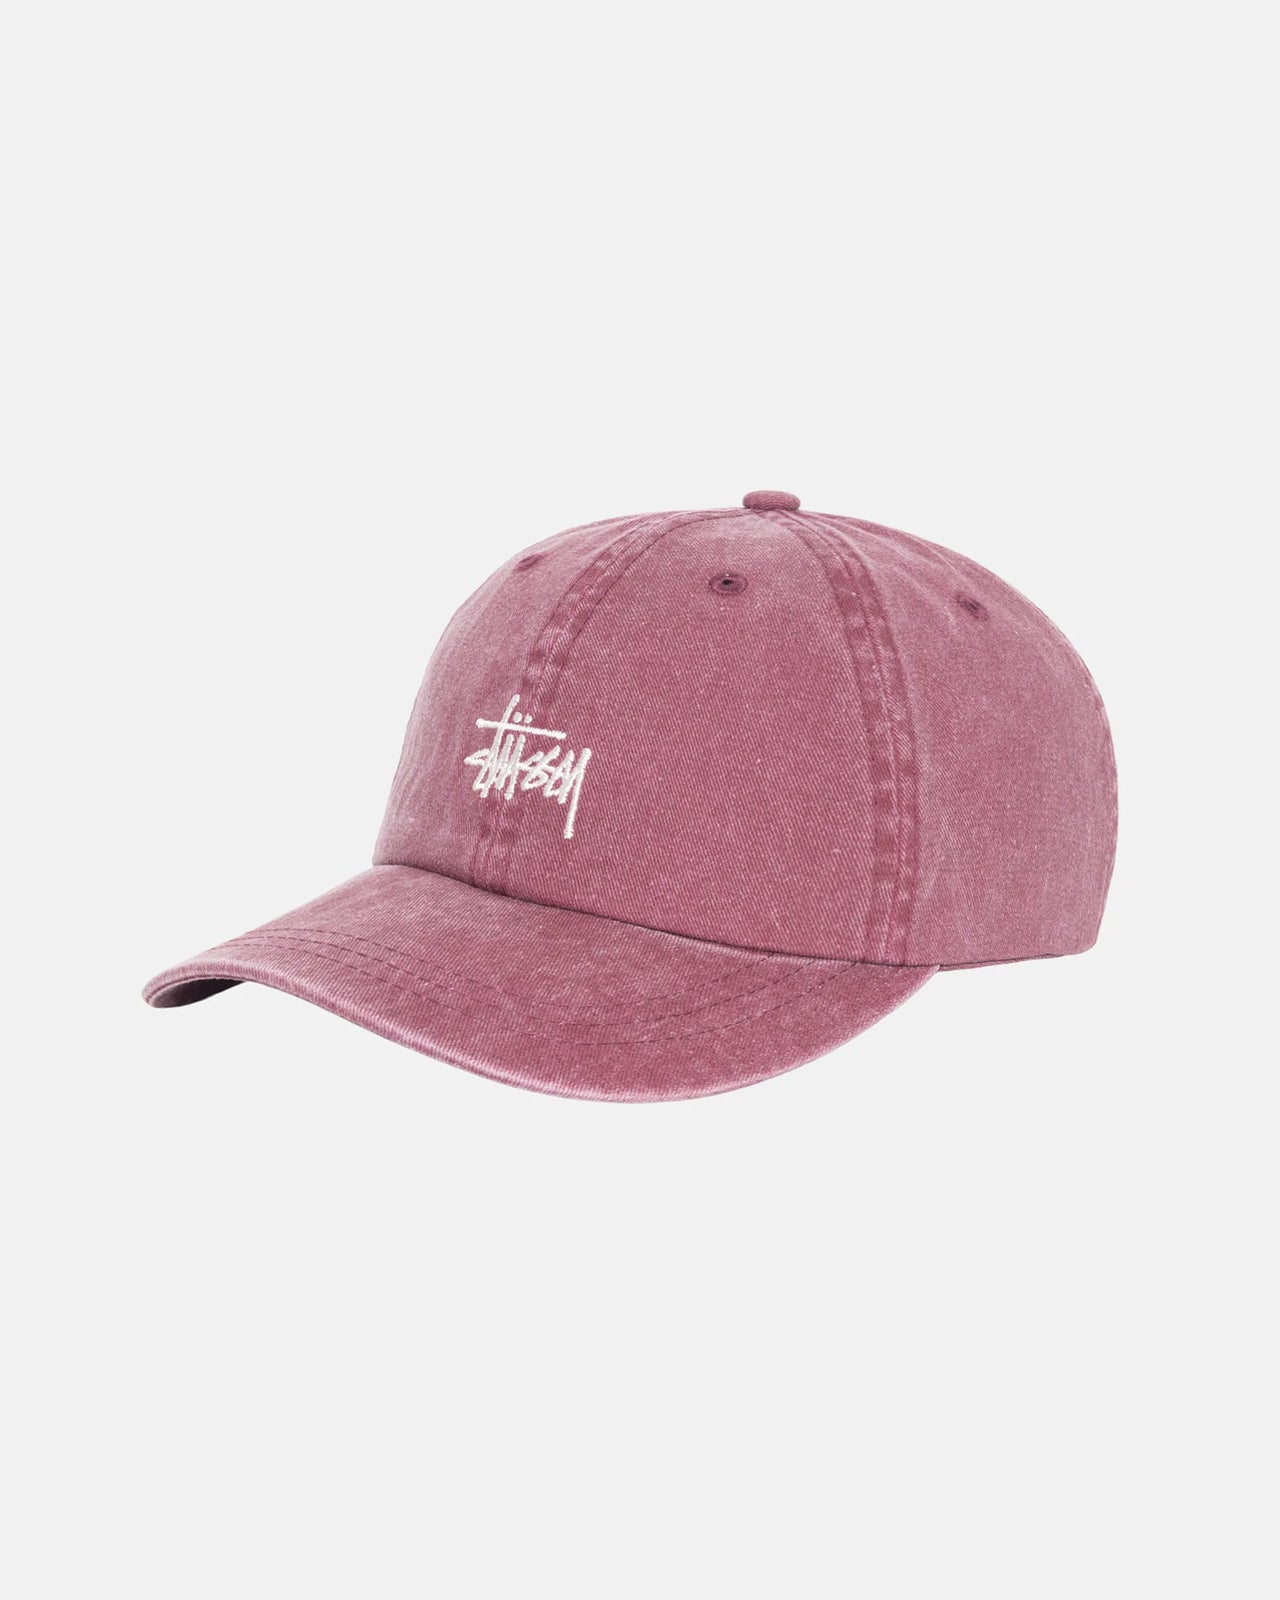 Washed Stock Low Pro Cap Burgundy